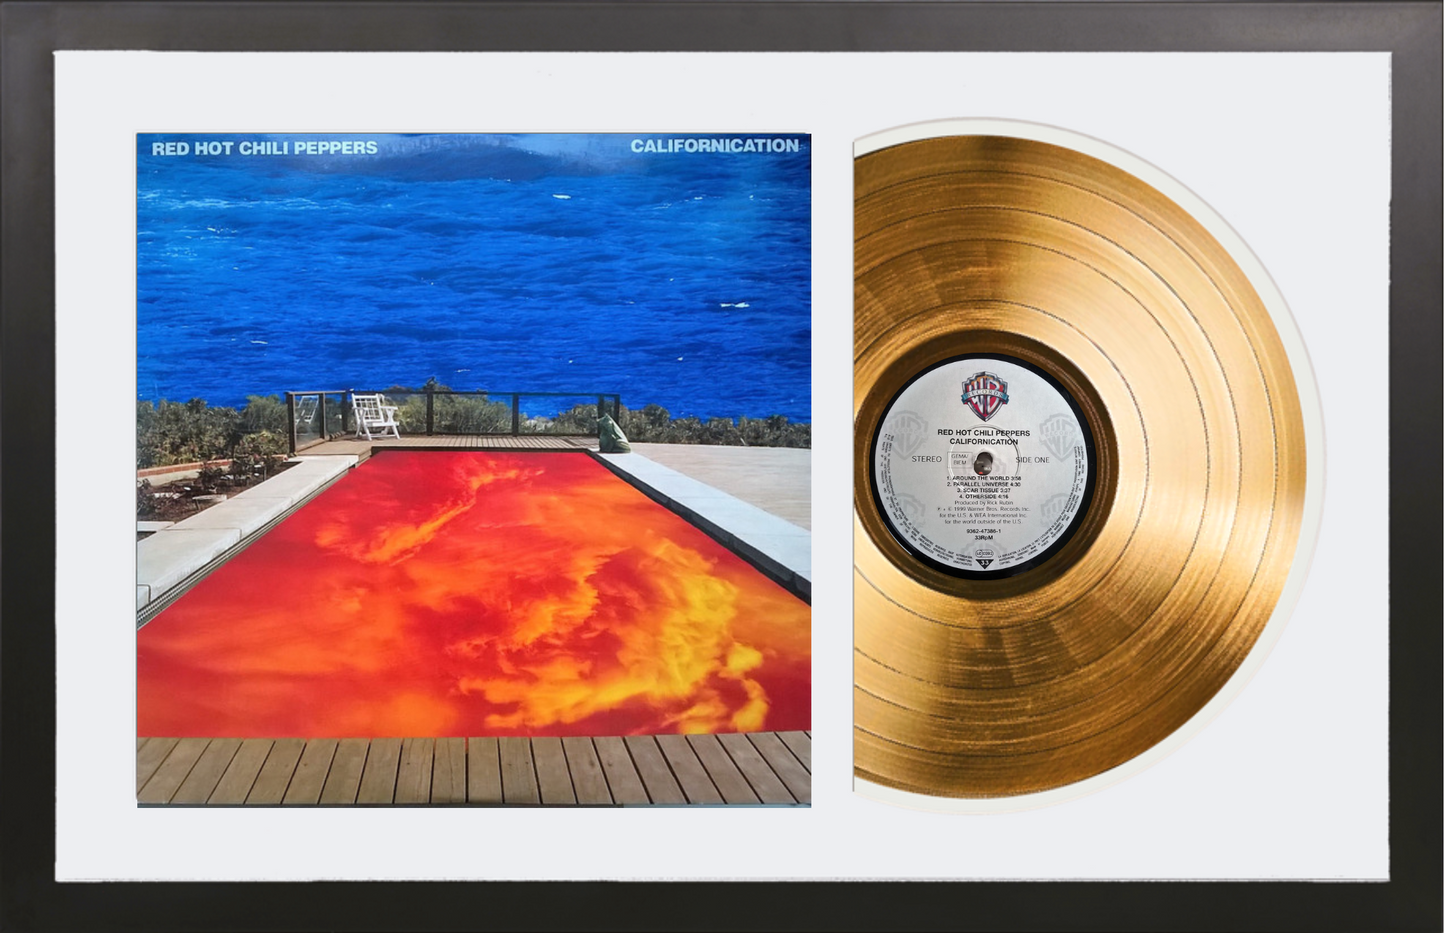 Red Hot Chili Peppers - Californication - 14K Gold Plated, Limited Edition Album